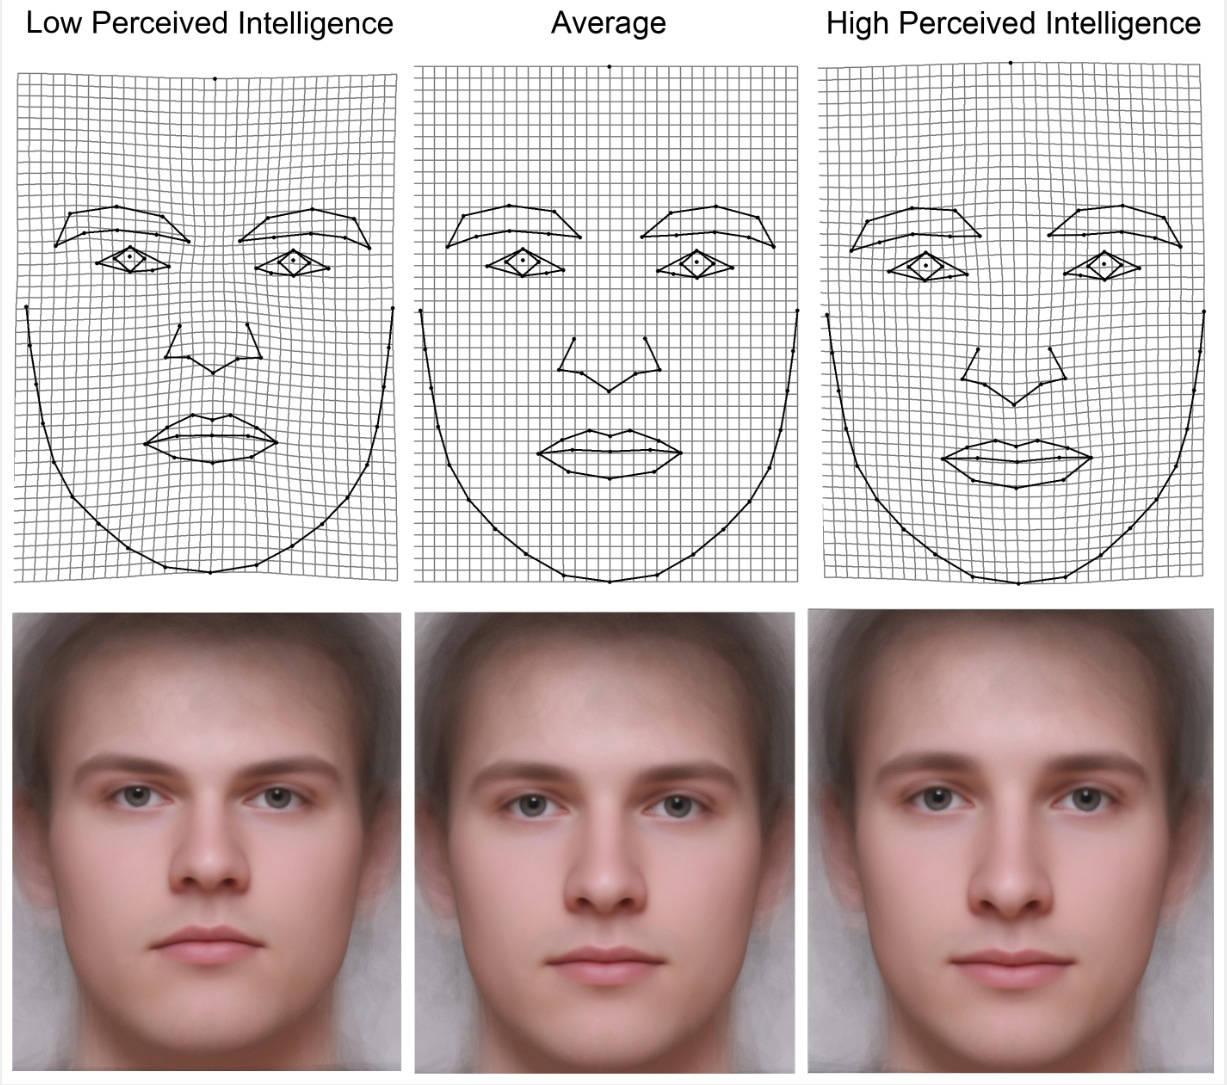 average faces - composite portraits - do smart people look - Low Perceived Intelligence Average High Perceived Intelligence 10 To a